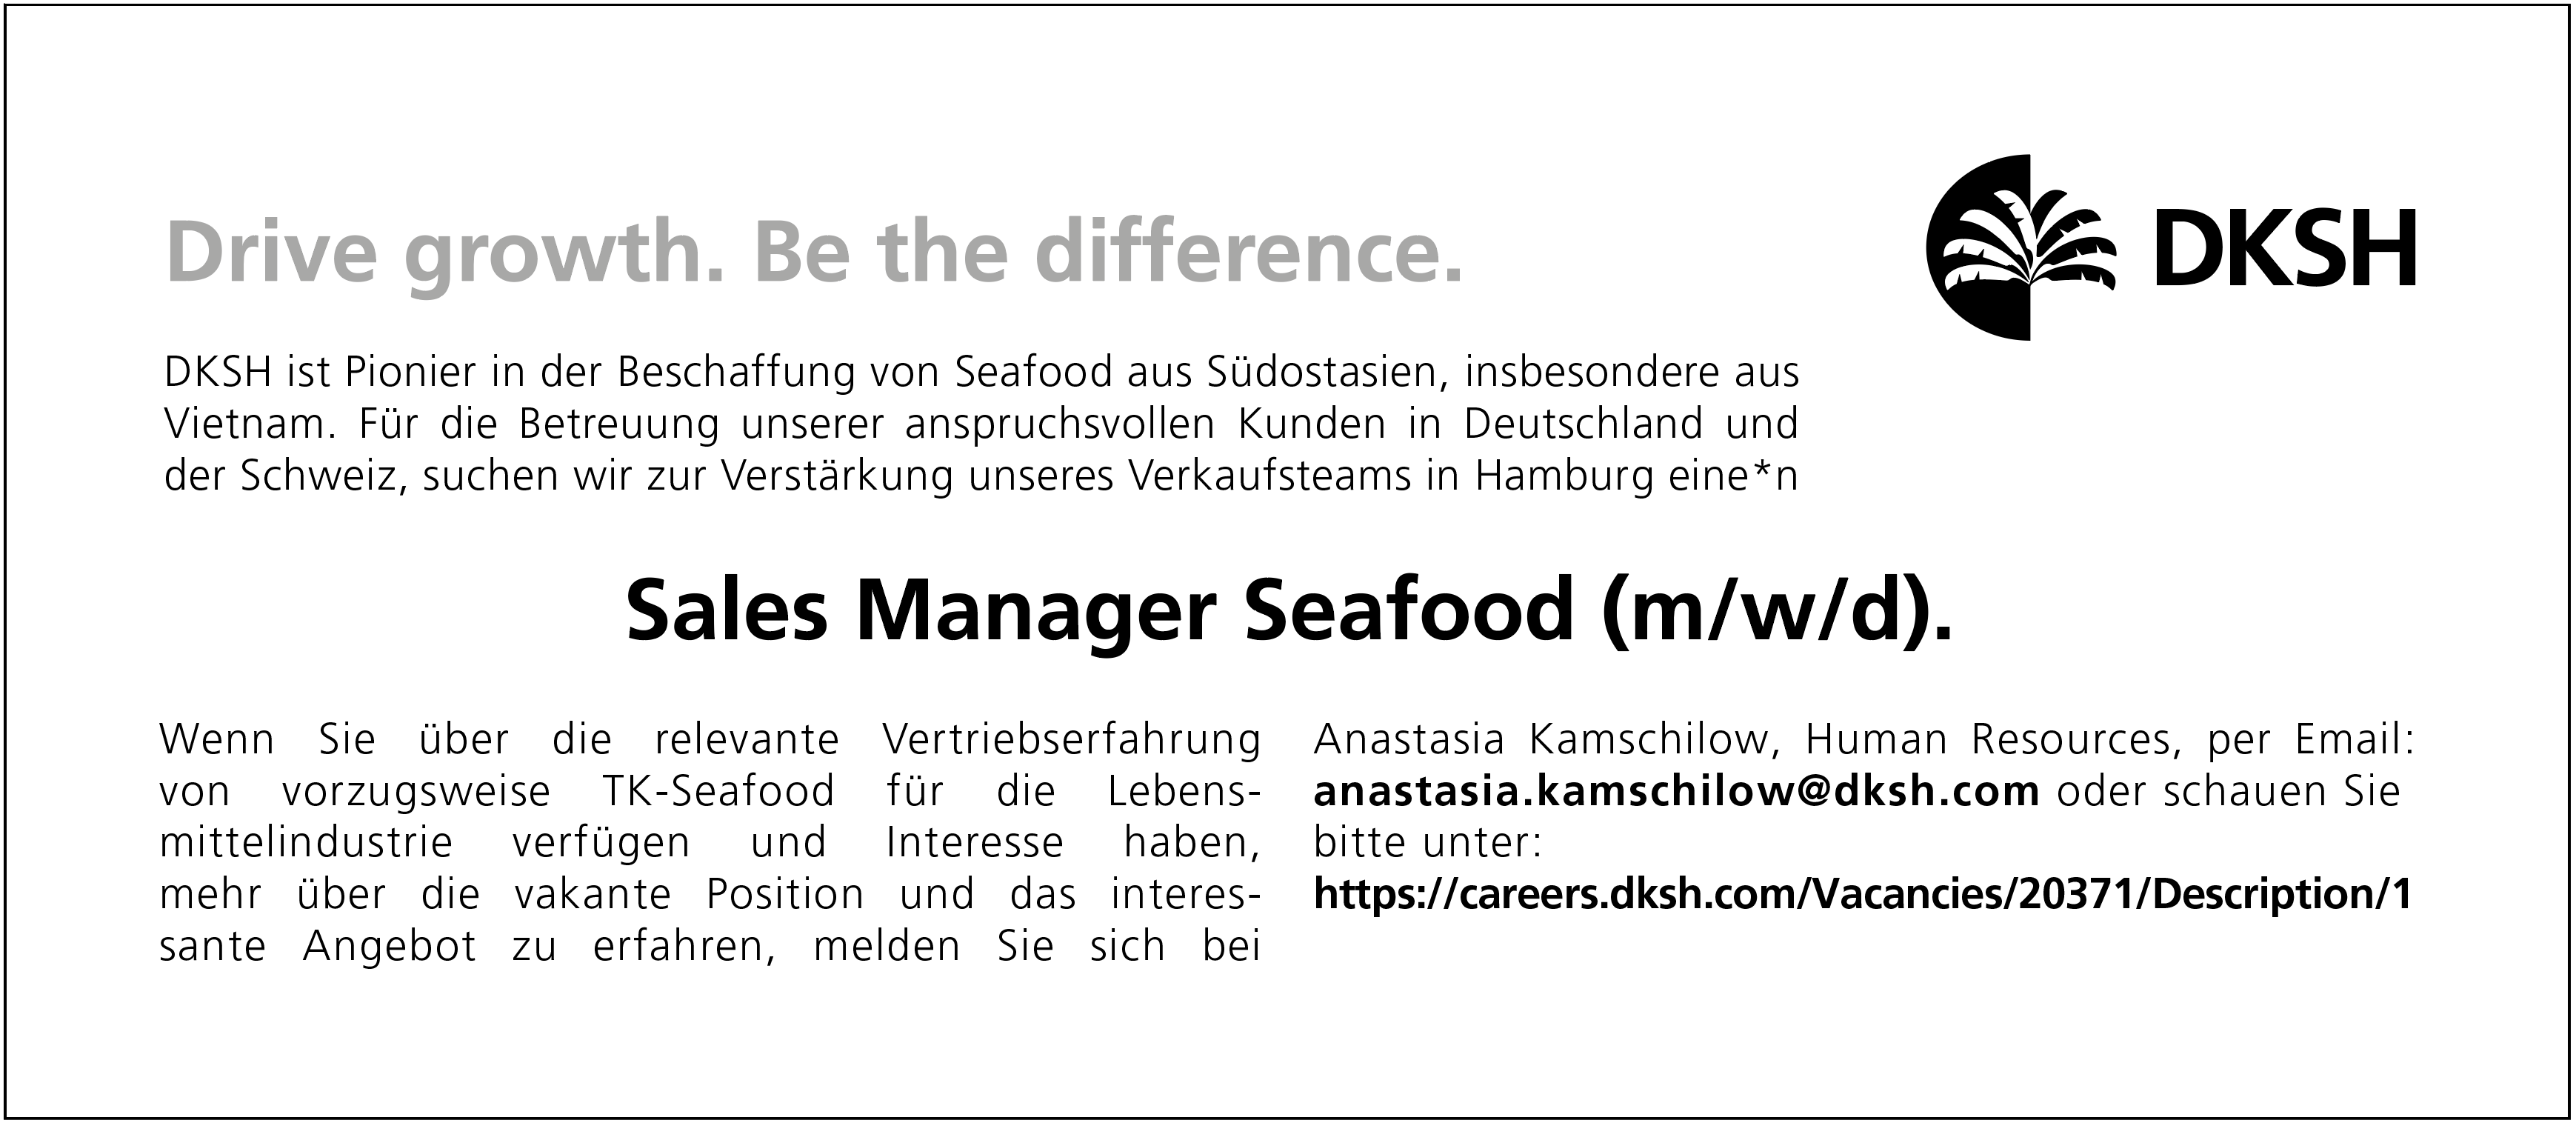 Sales Manager Seafood (m/w/d)